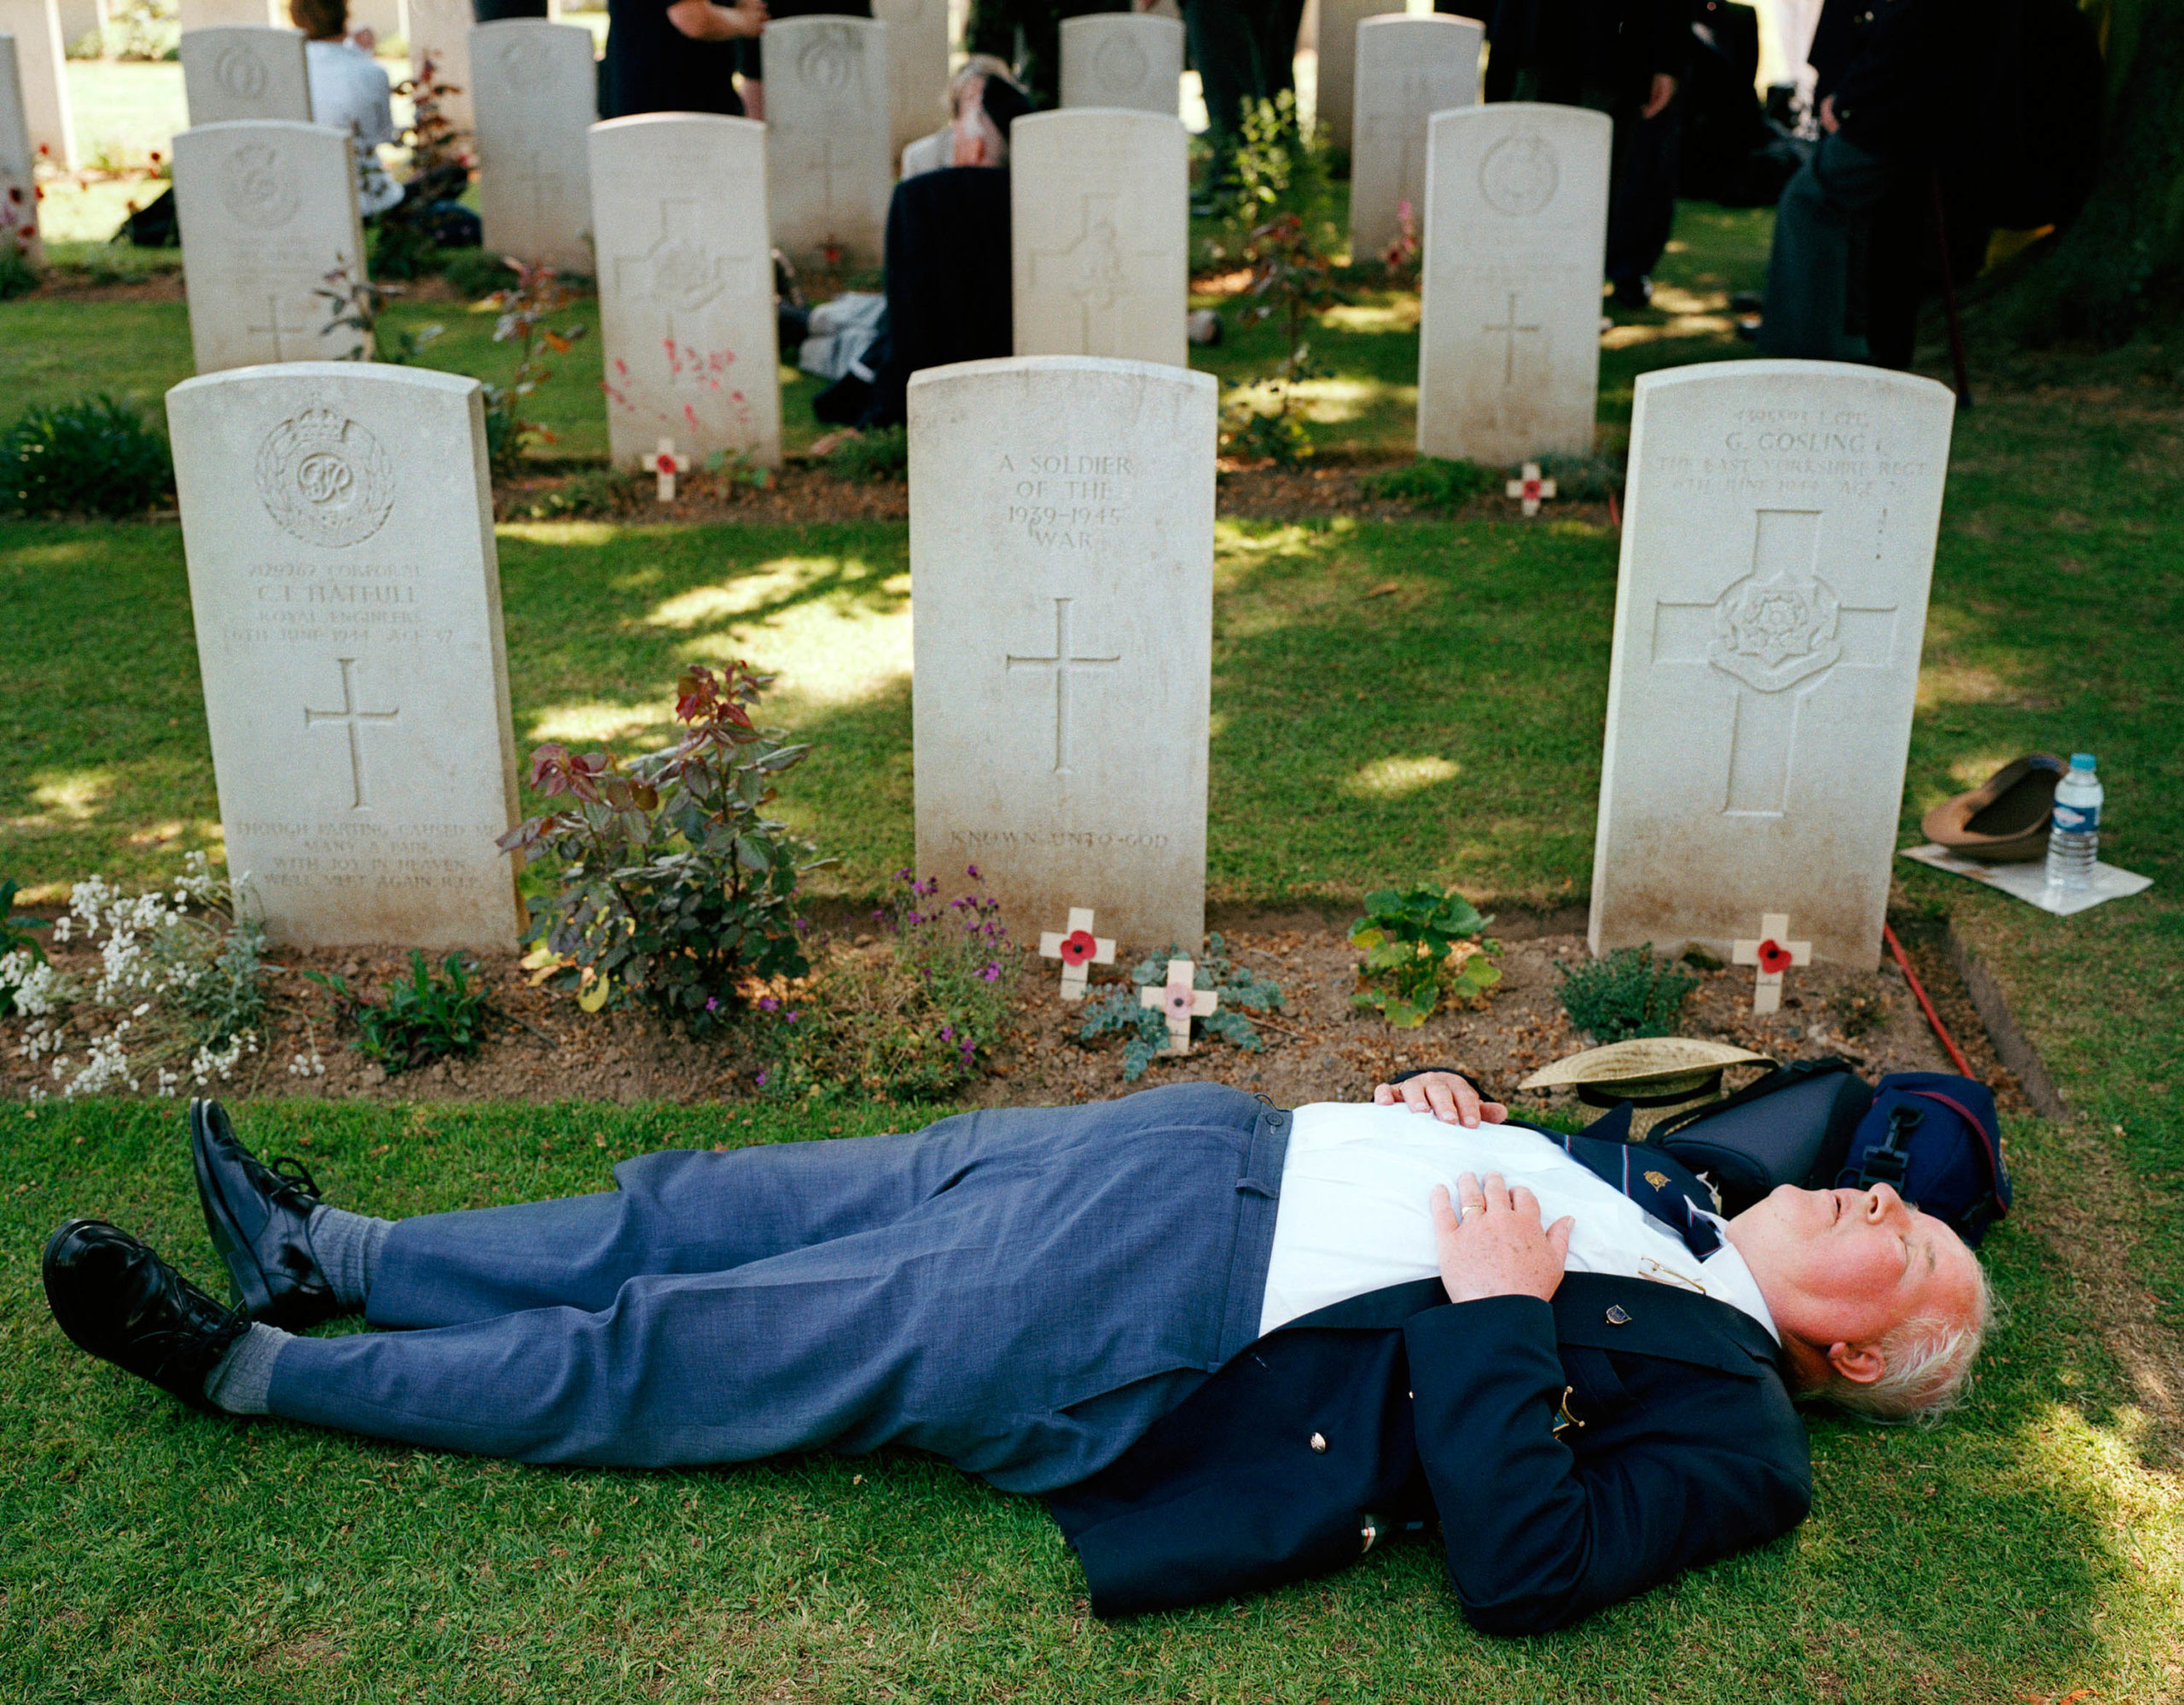 Normandy, Bayeux. D-Day celebrations. British veteran after the remembrance ceremony.